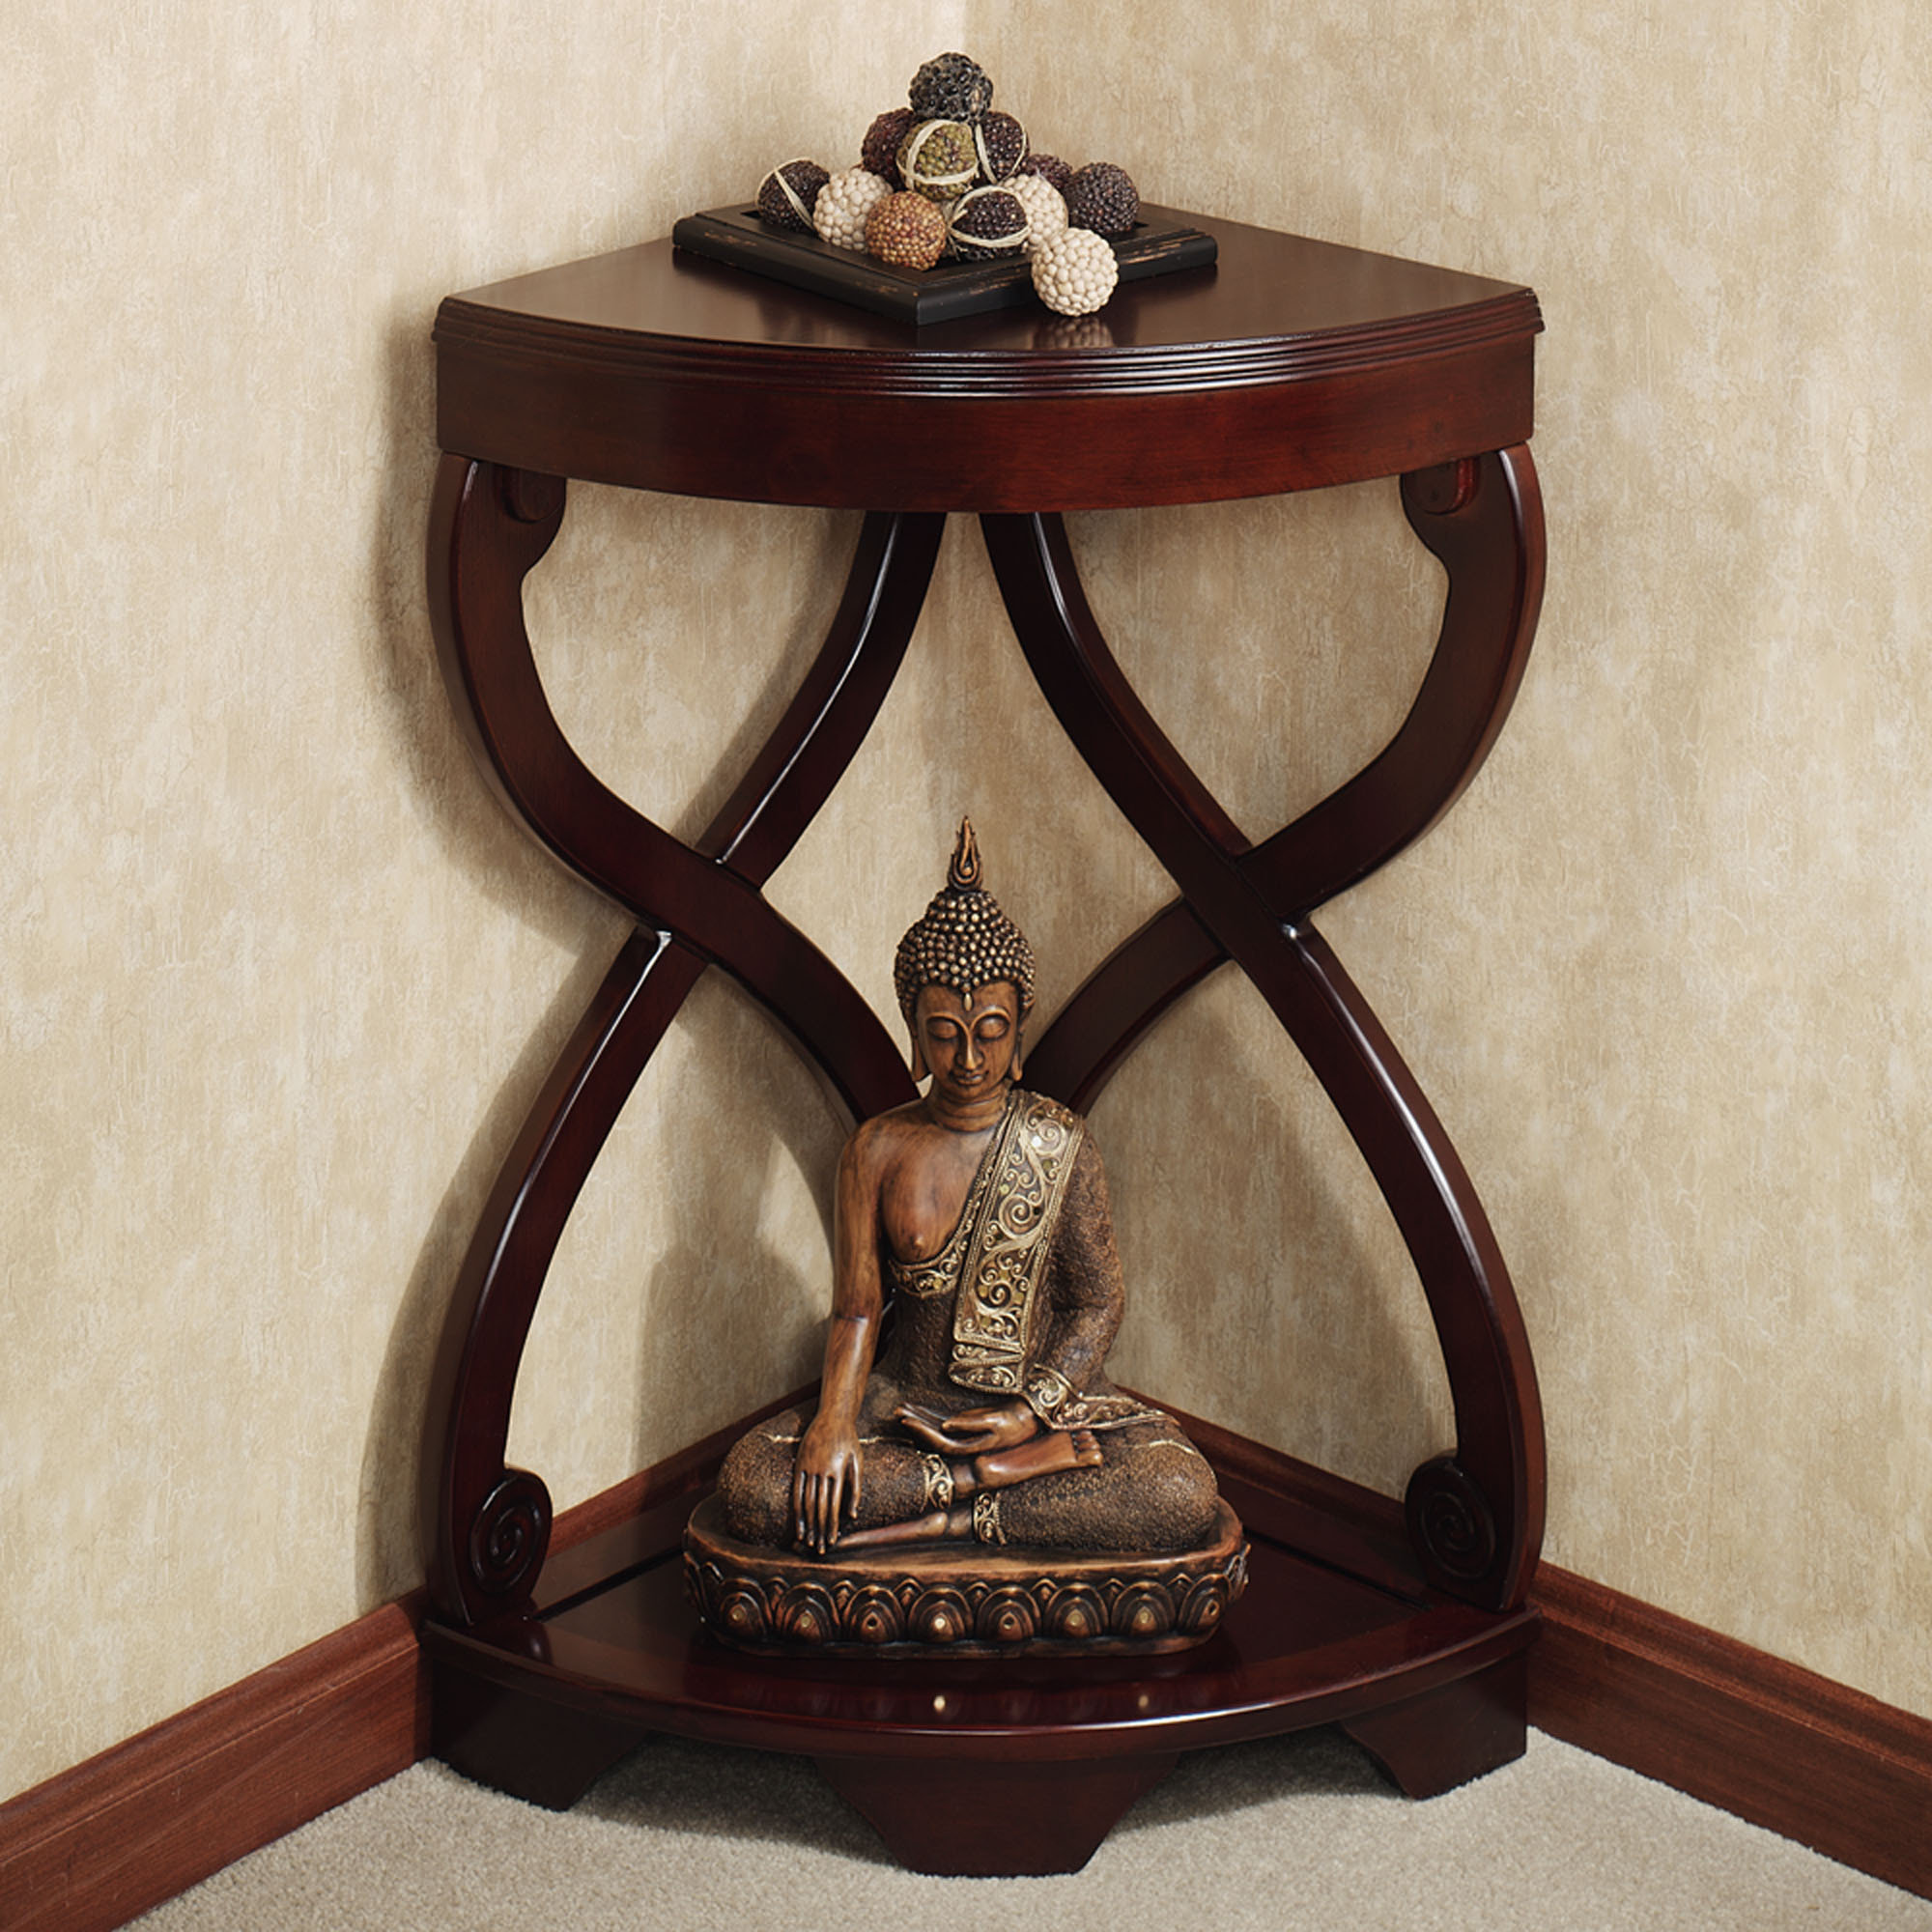 unique accent tables for living room small house interior design furniture corner espresso color paxton wooden table and buddha statue awesome using drawer not antique round ikea